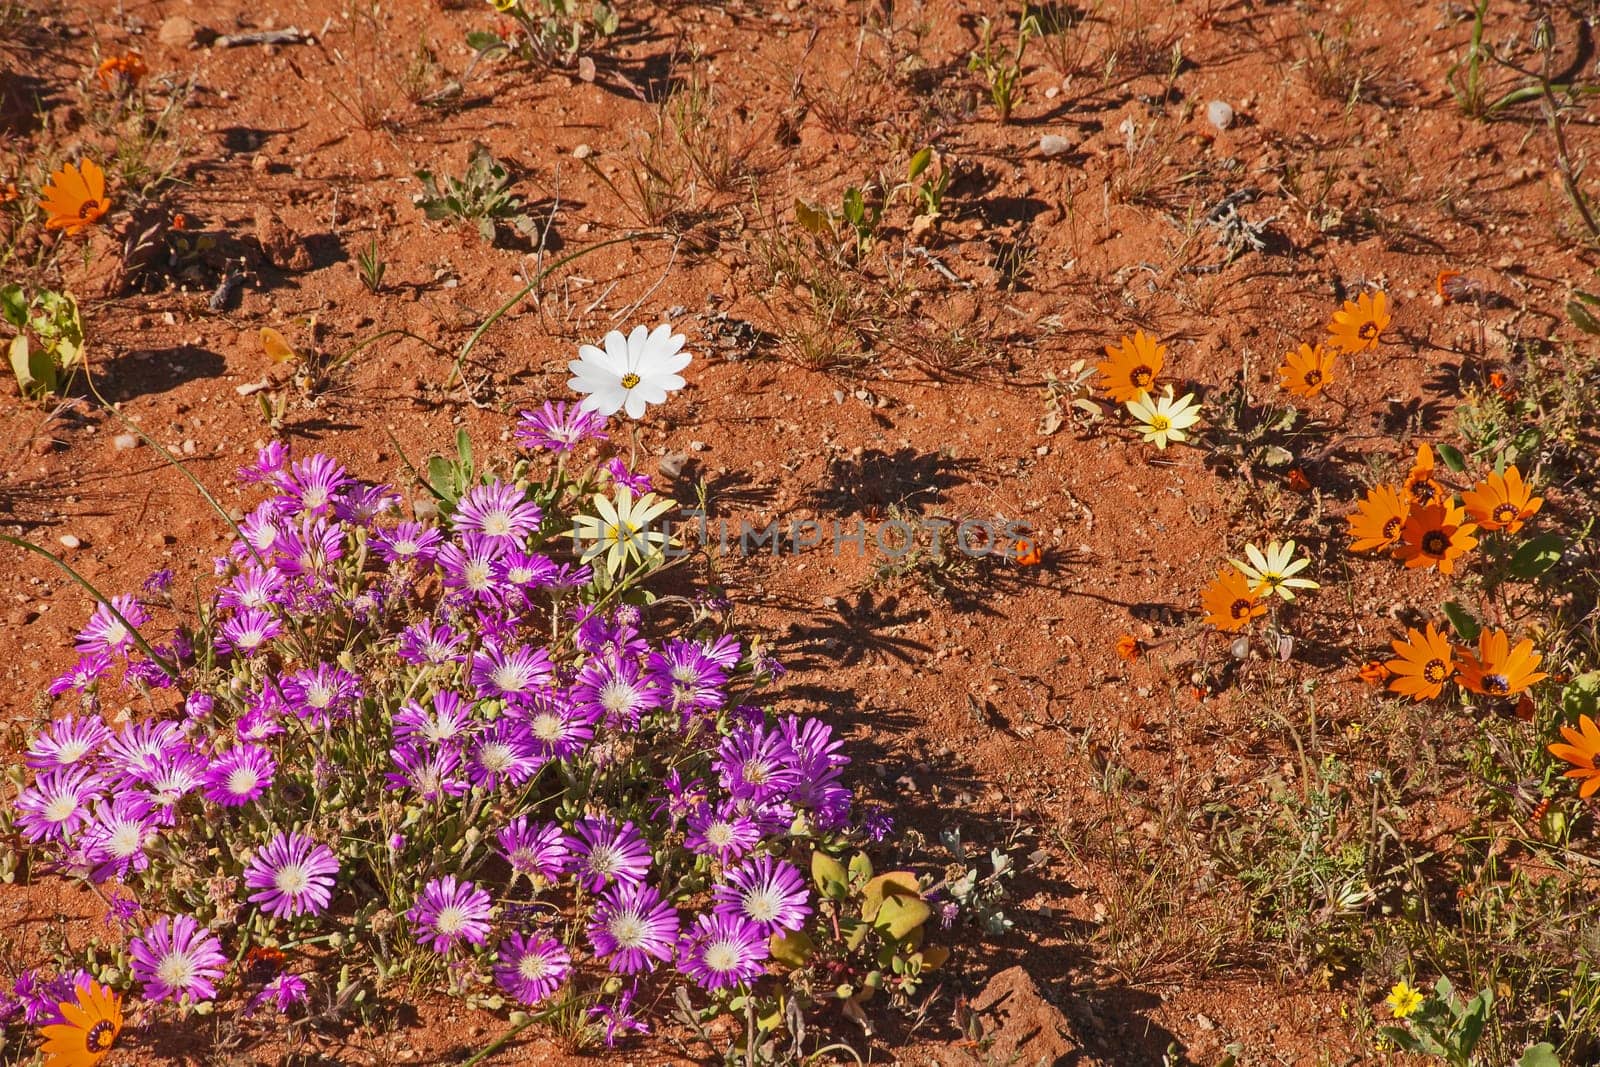 Namaqualand Spring flowers 11611 by kobus_peche